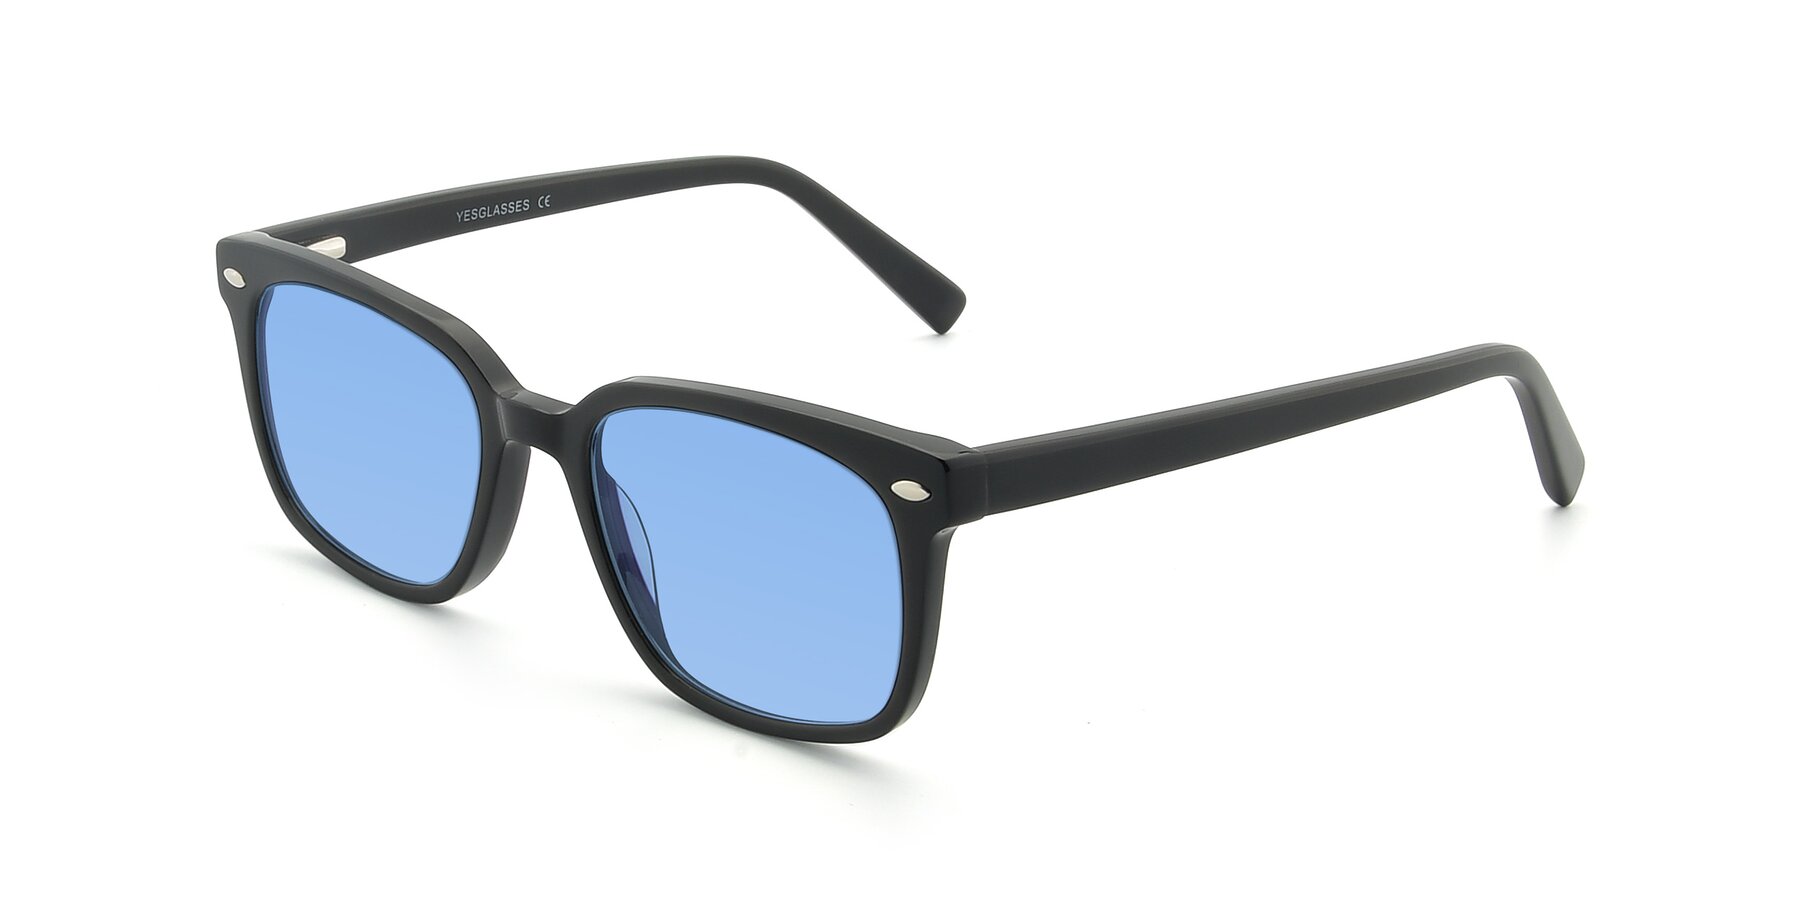 Angle of 17349 in Black with Medium Blue Tinted Lenses